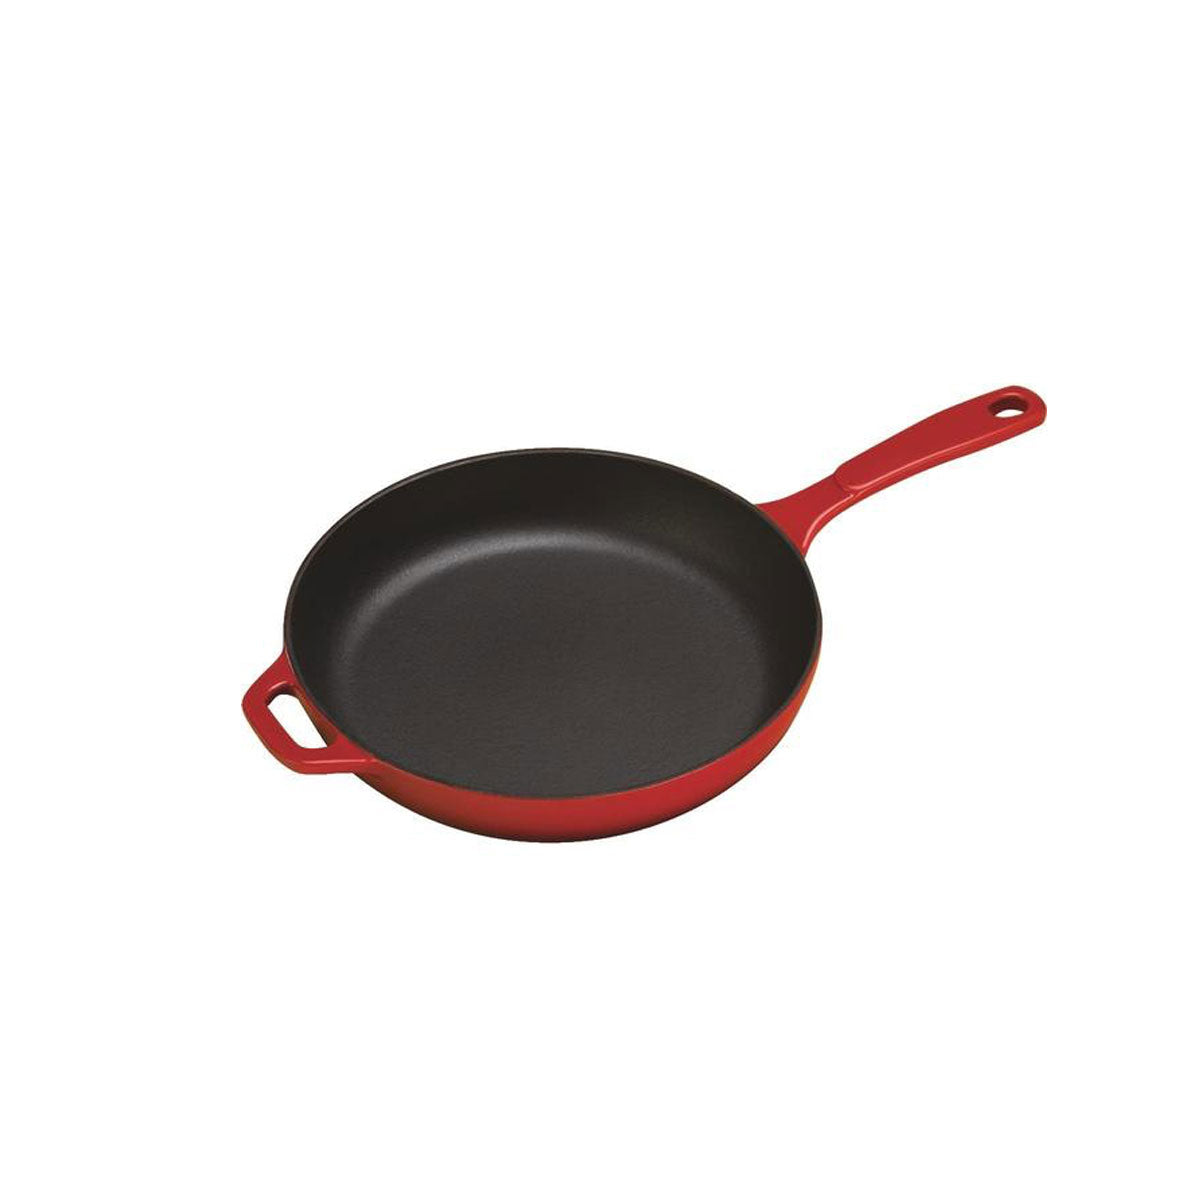 2-Piece Lodge Grill Polycarbonate Pan Scrapers (Red/Black)